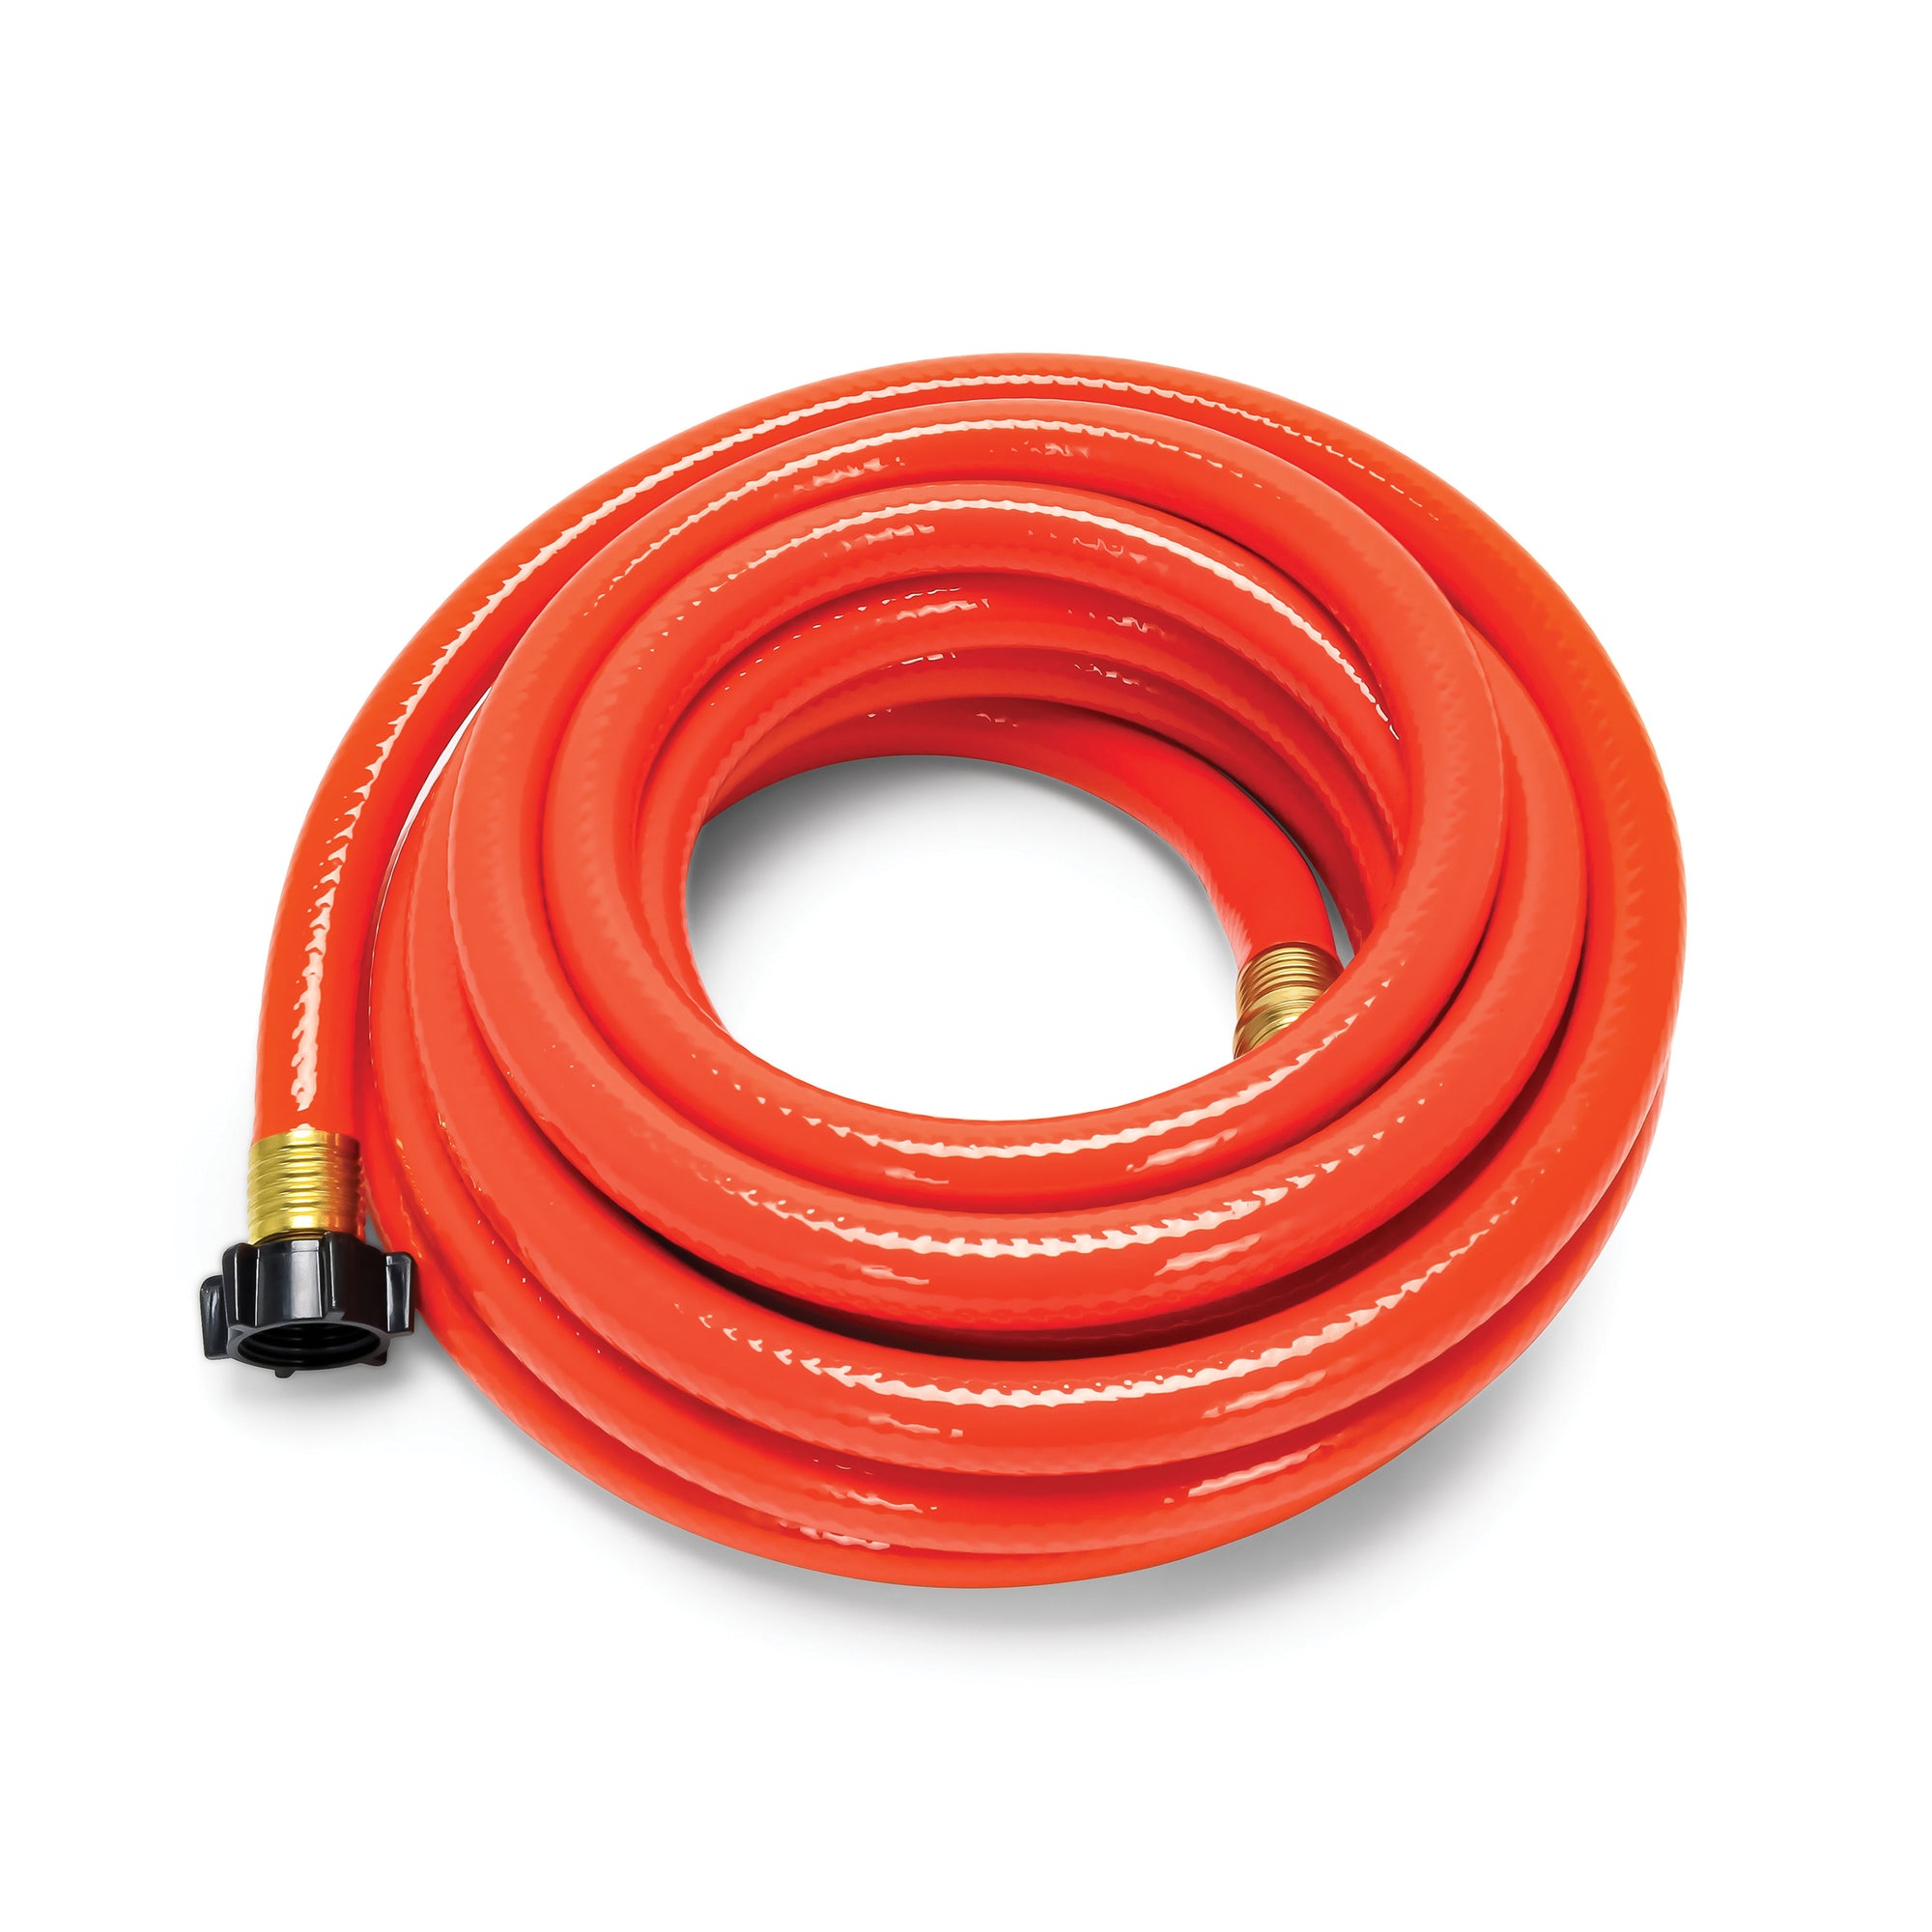 Camco 22990 RhinoFLEX Gray/Black Water Hose - 25' Clean Out Hose, 5/8" ID